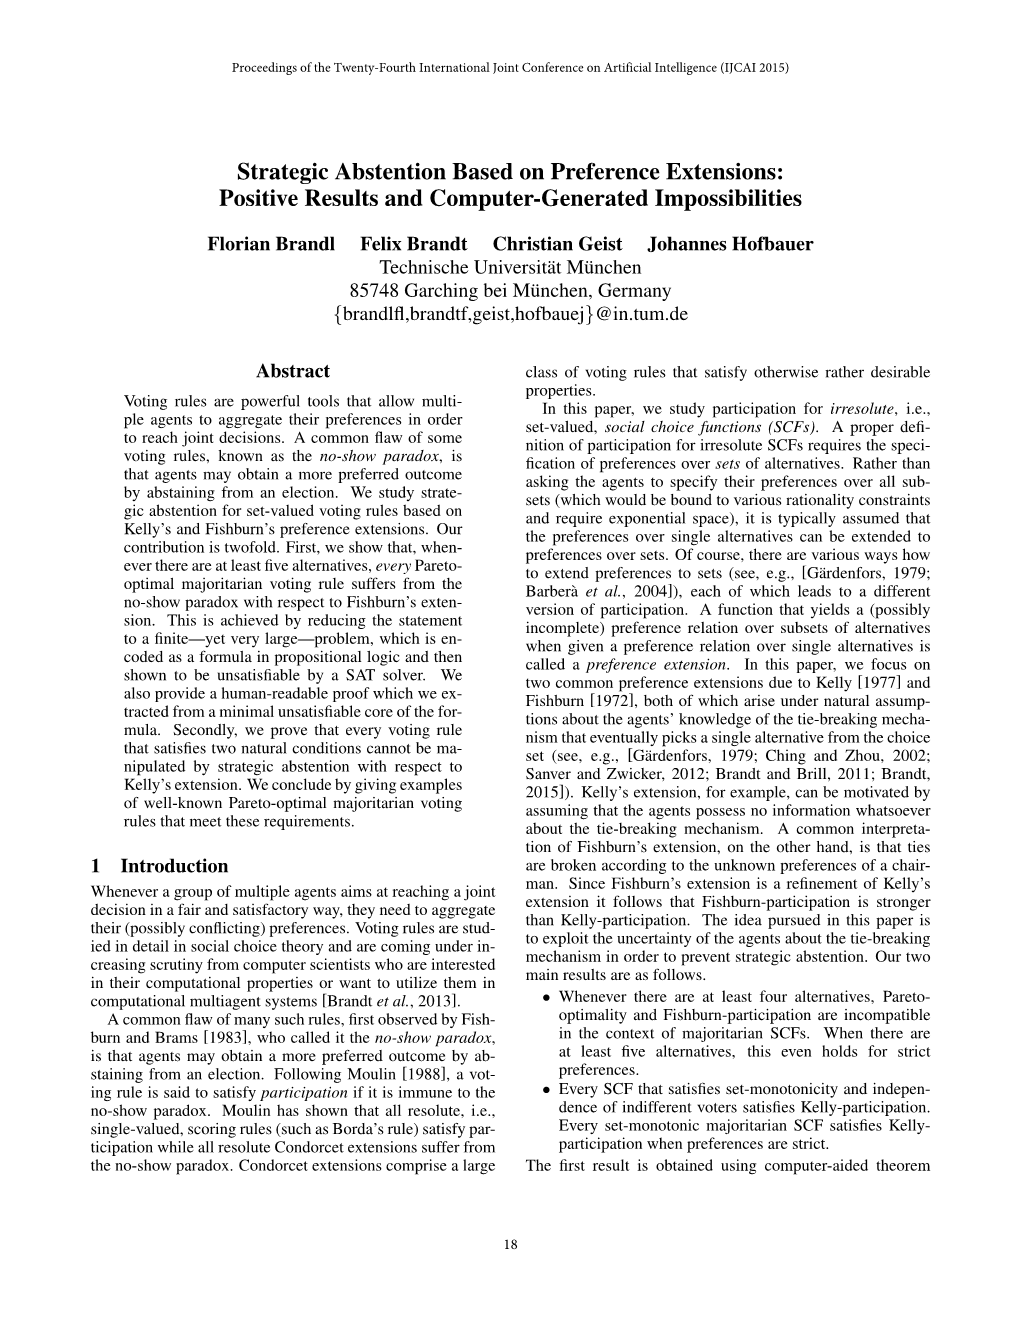 Strategic Abstention Based on Preference Extensions: Positive Results and Computer-Generated Impossibilities